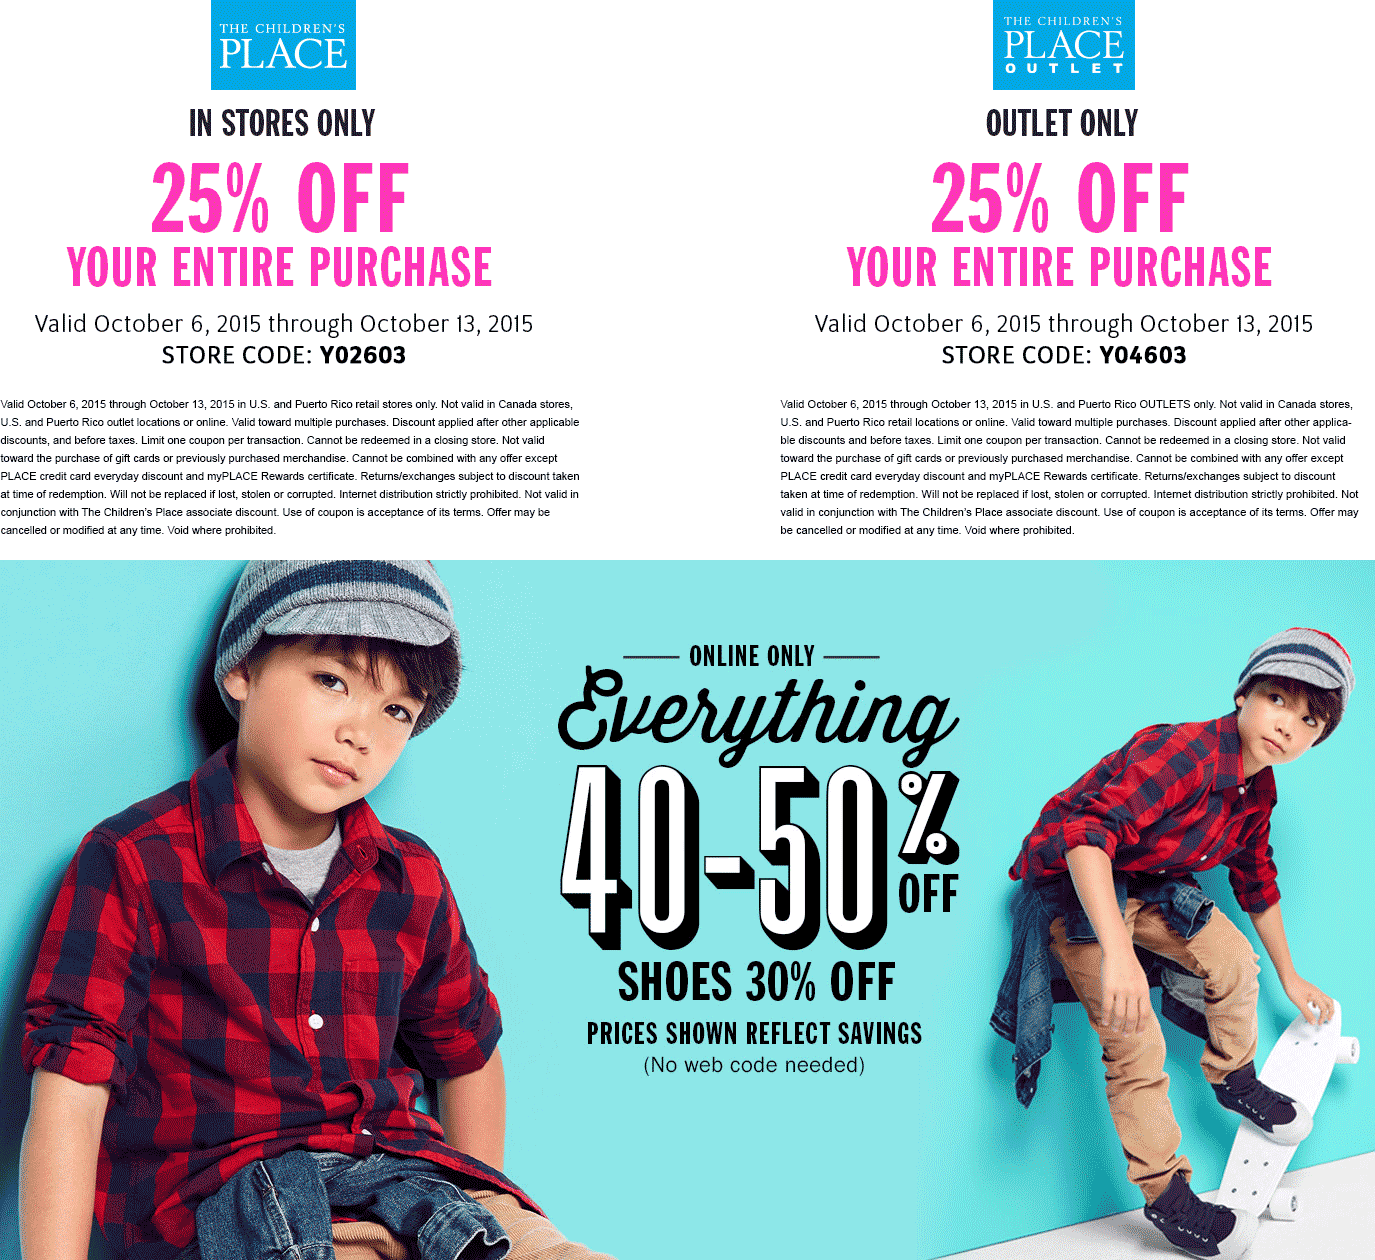 The Childrens Place Coupon April 2024 25% off at The Childrens Place & outlet locations, or 40-50% everything online